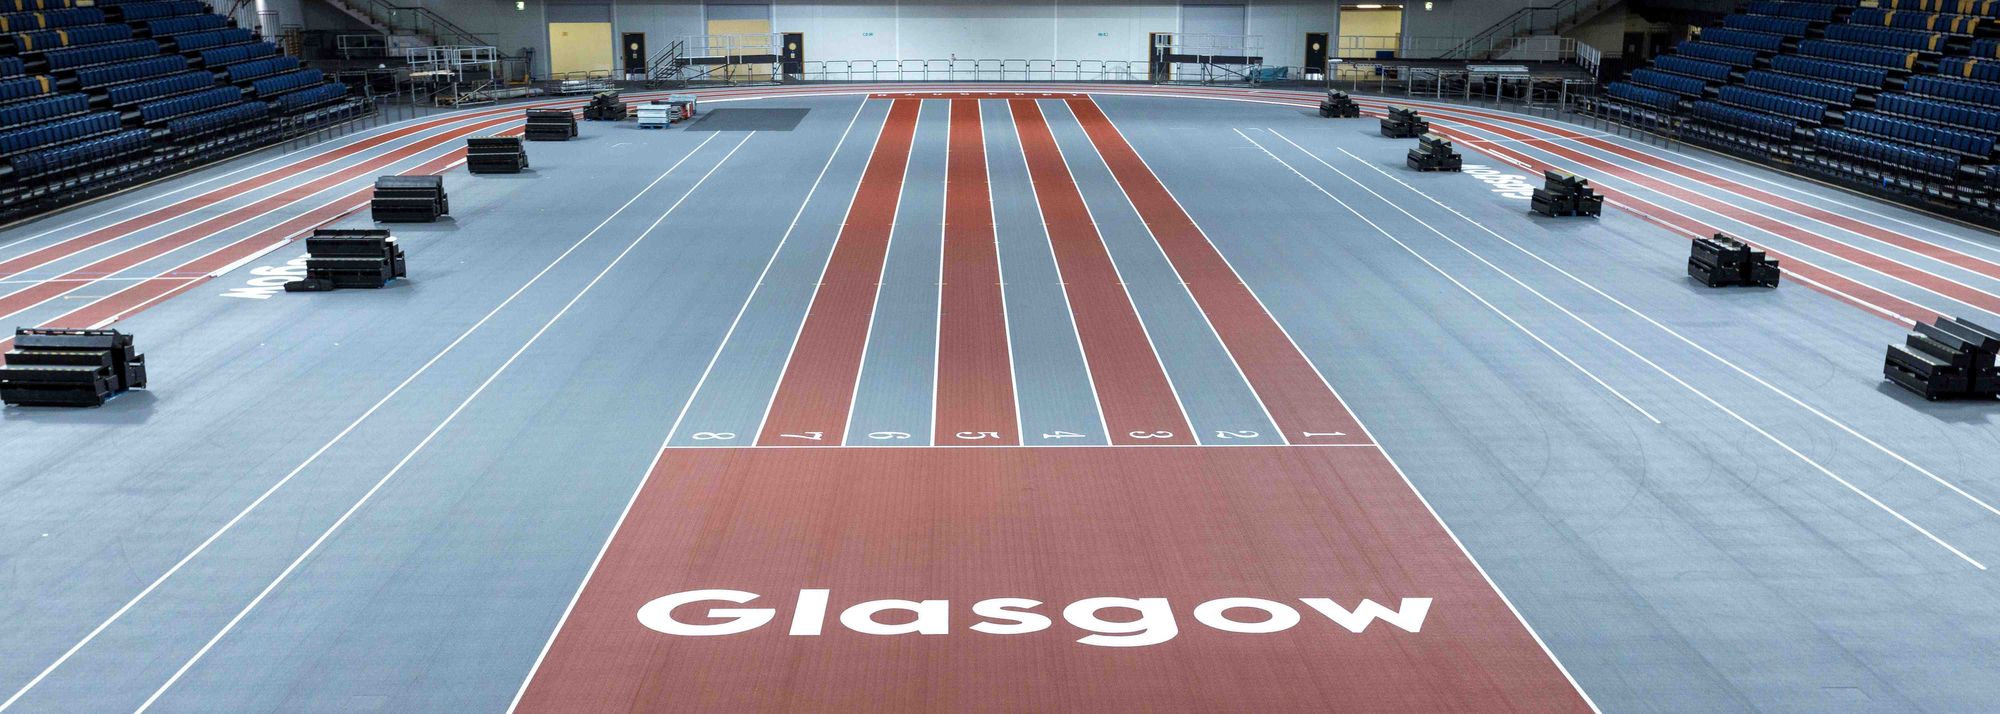 A brand-new track surface will await the world’s best athletes when they compete for world championship titles at the Glasgow Arena next month.